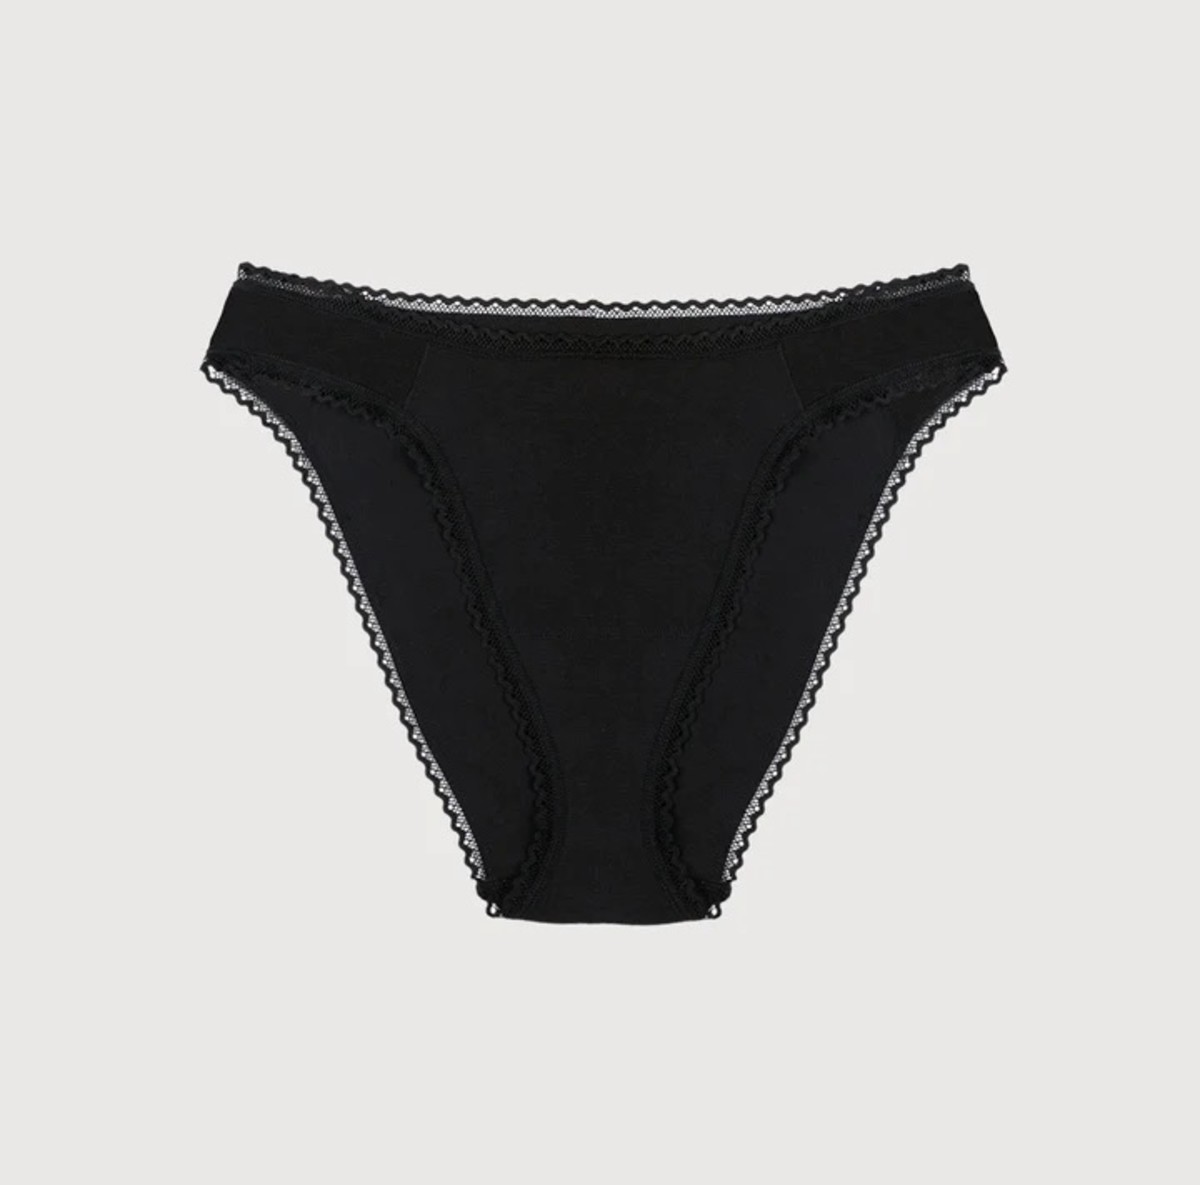 Cacique + Metallic Foil Mid-Waist Strappy-Back Cheeky Panty